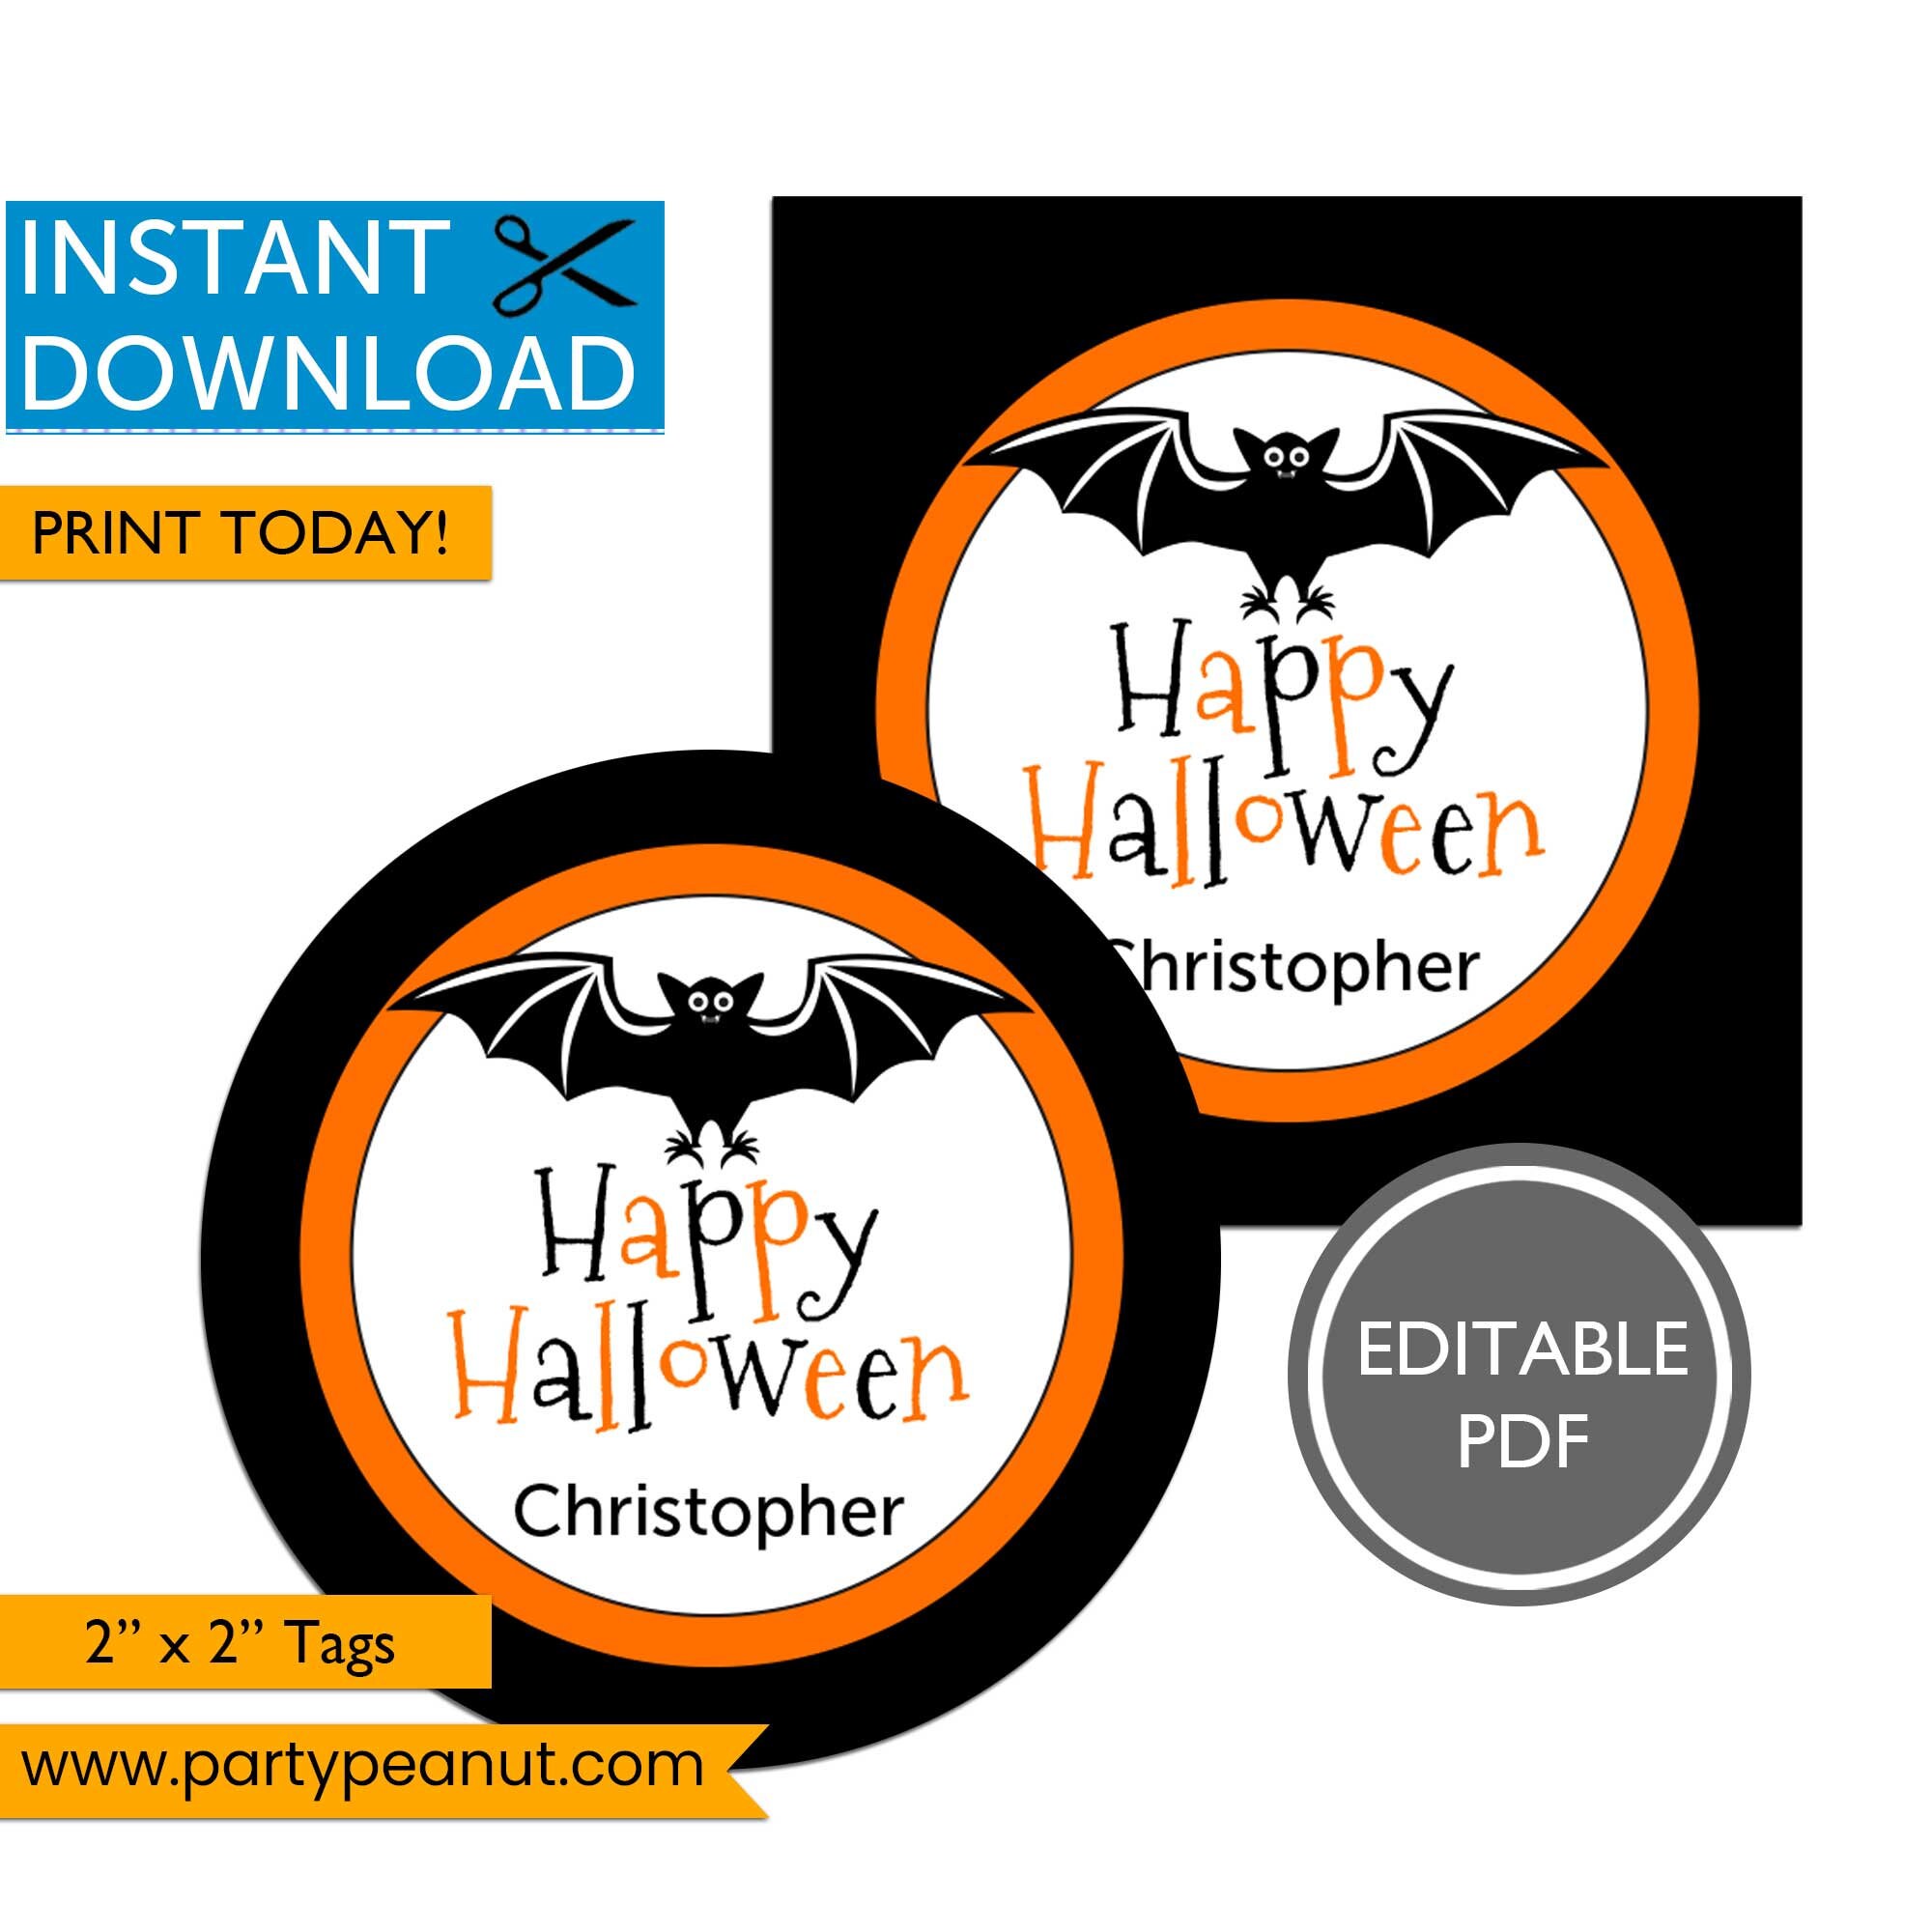 Crazy Straw Halloween Printable, Halloween Gift, Gift Tag, Party Favor,  Halloween Gift for Kids, School Gift, Halloween, Just Add Confetti 